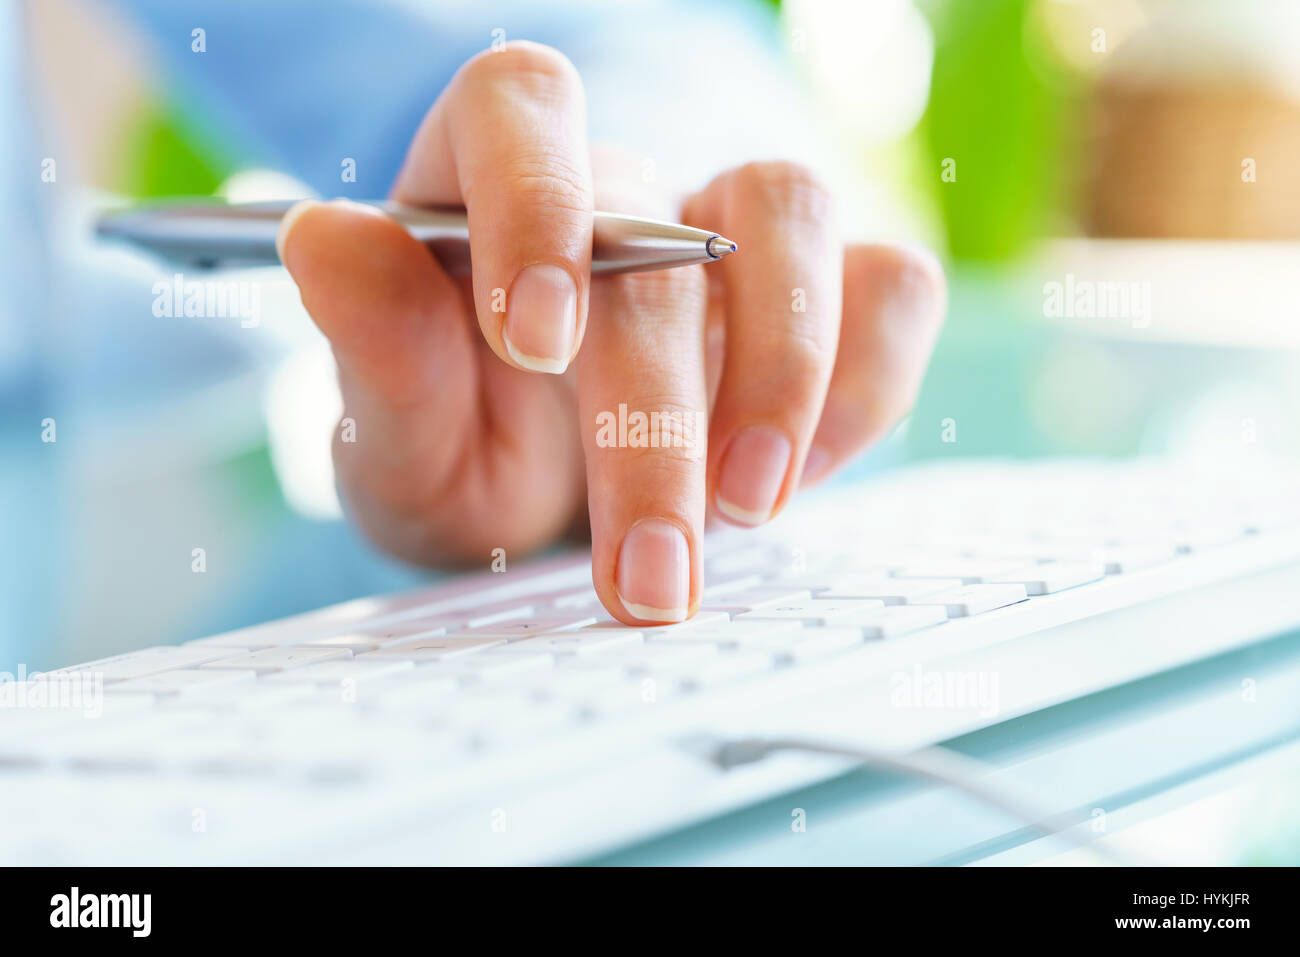 Hands or woman office worker typing on the keyboard Stock Photo